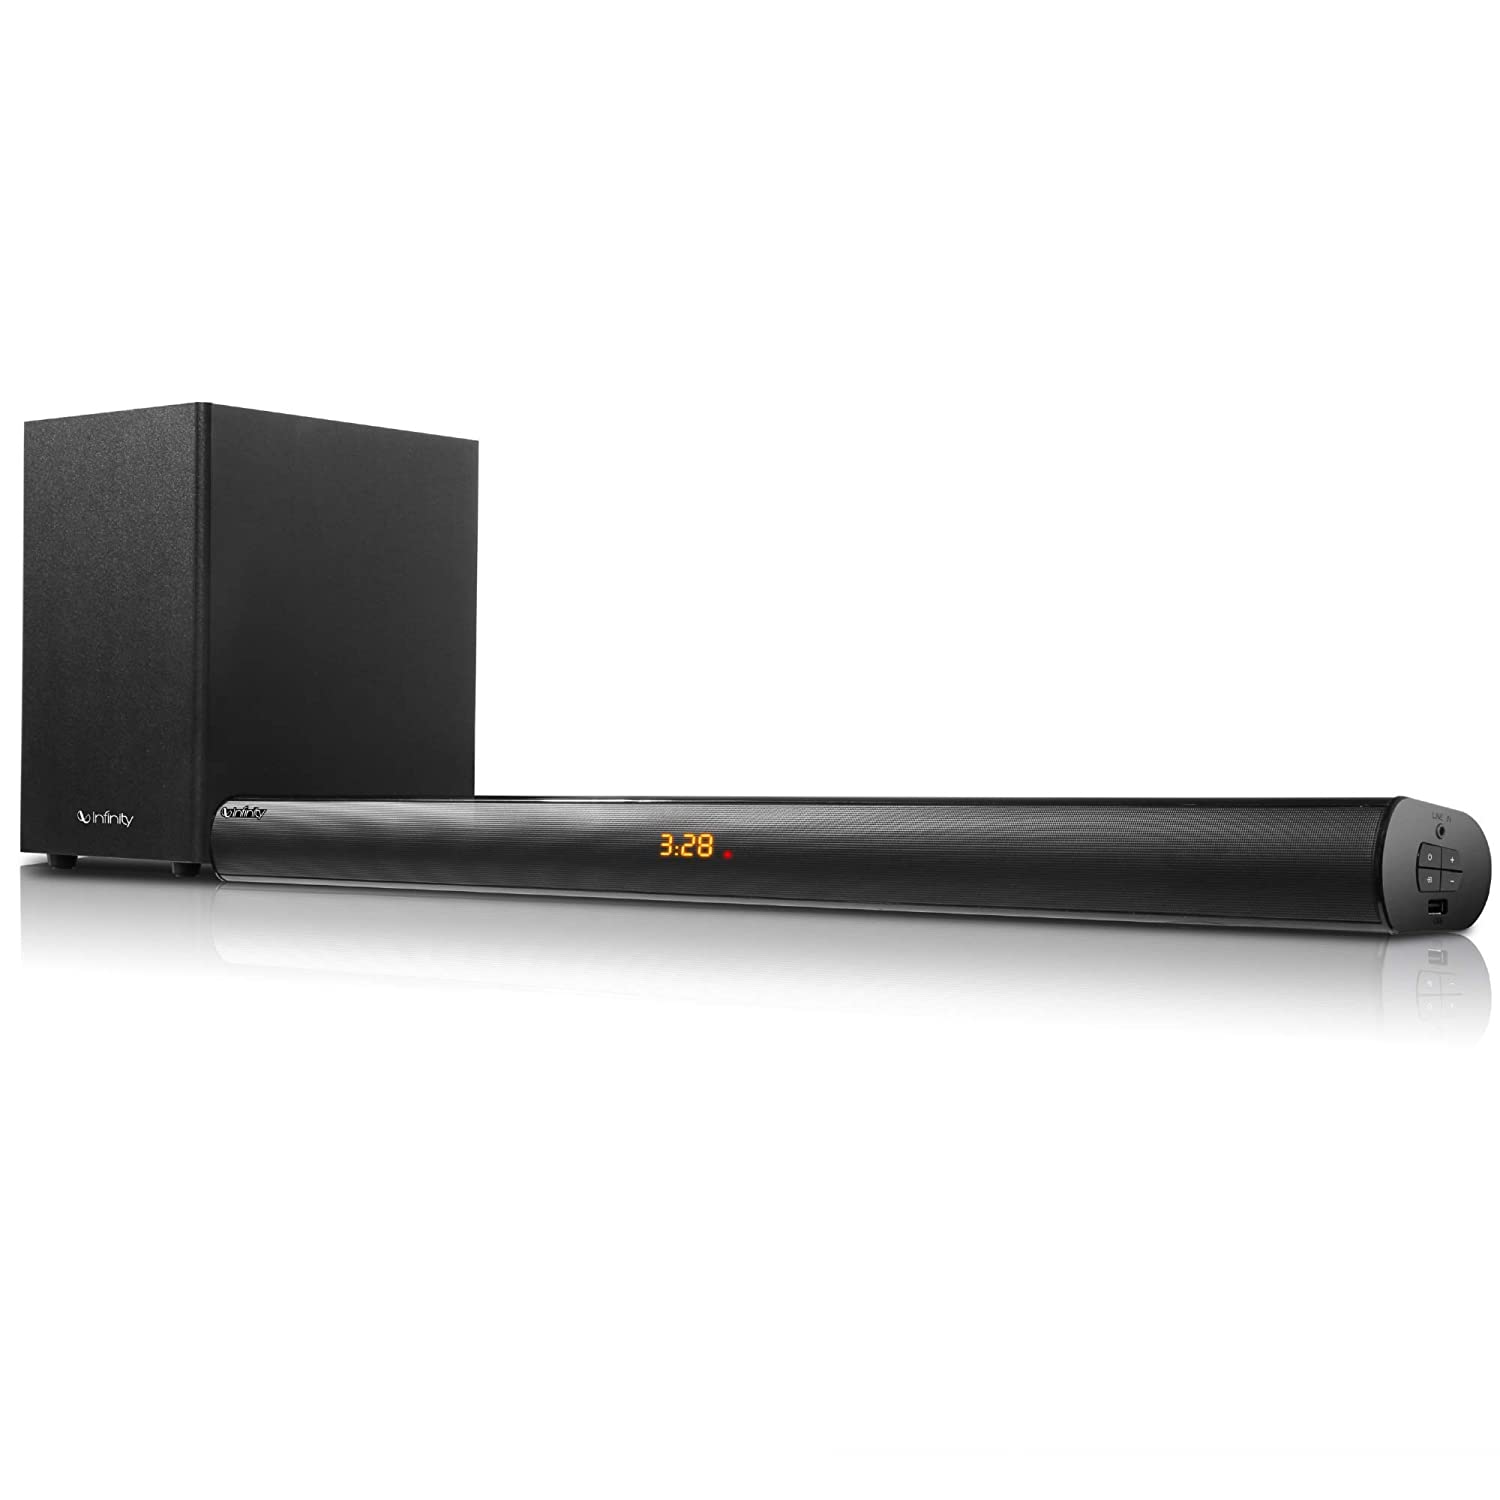 Amazon Sale: Not only Diwali, this sound bar is the life of every festival and party, know about the best selling sound bar in Amazon Sale